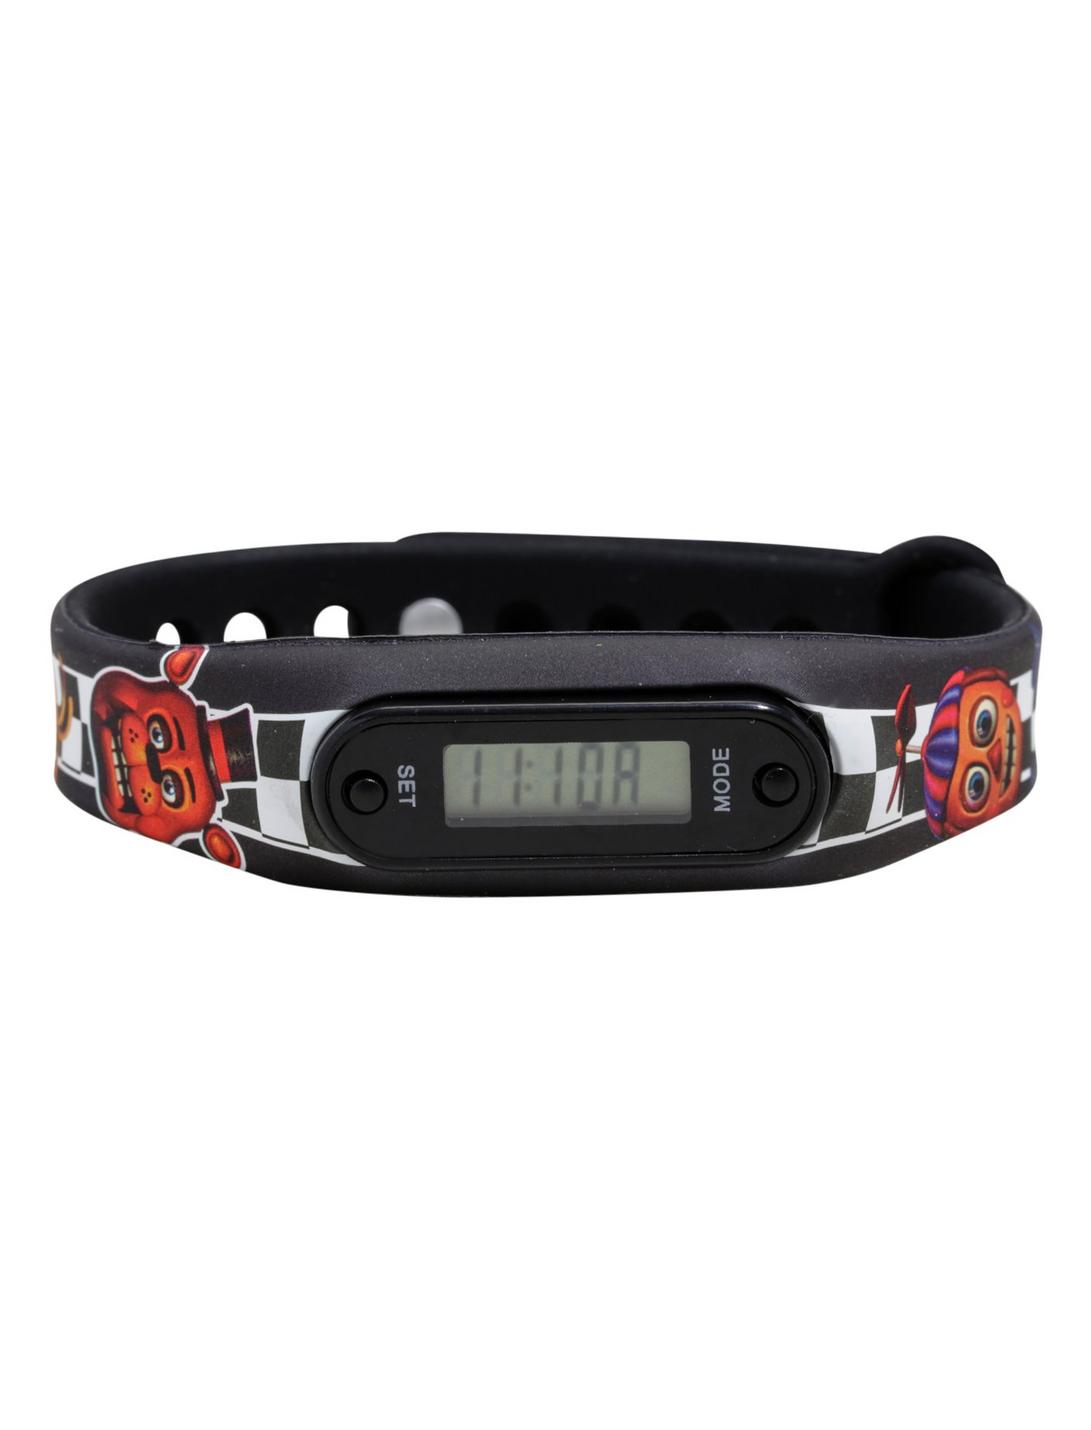 Five Nights At Freddy's Rubber LCD Watch/Step Tracker, , hi-res